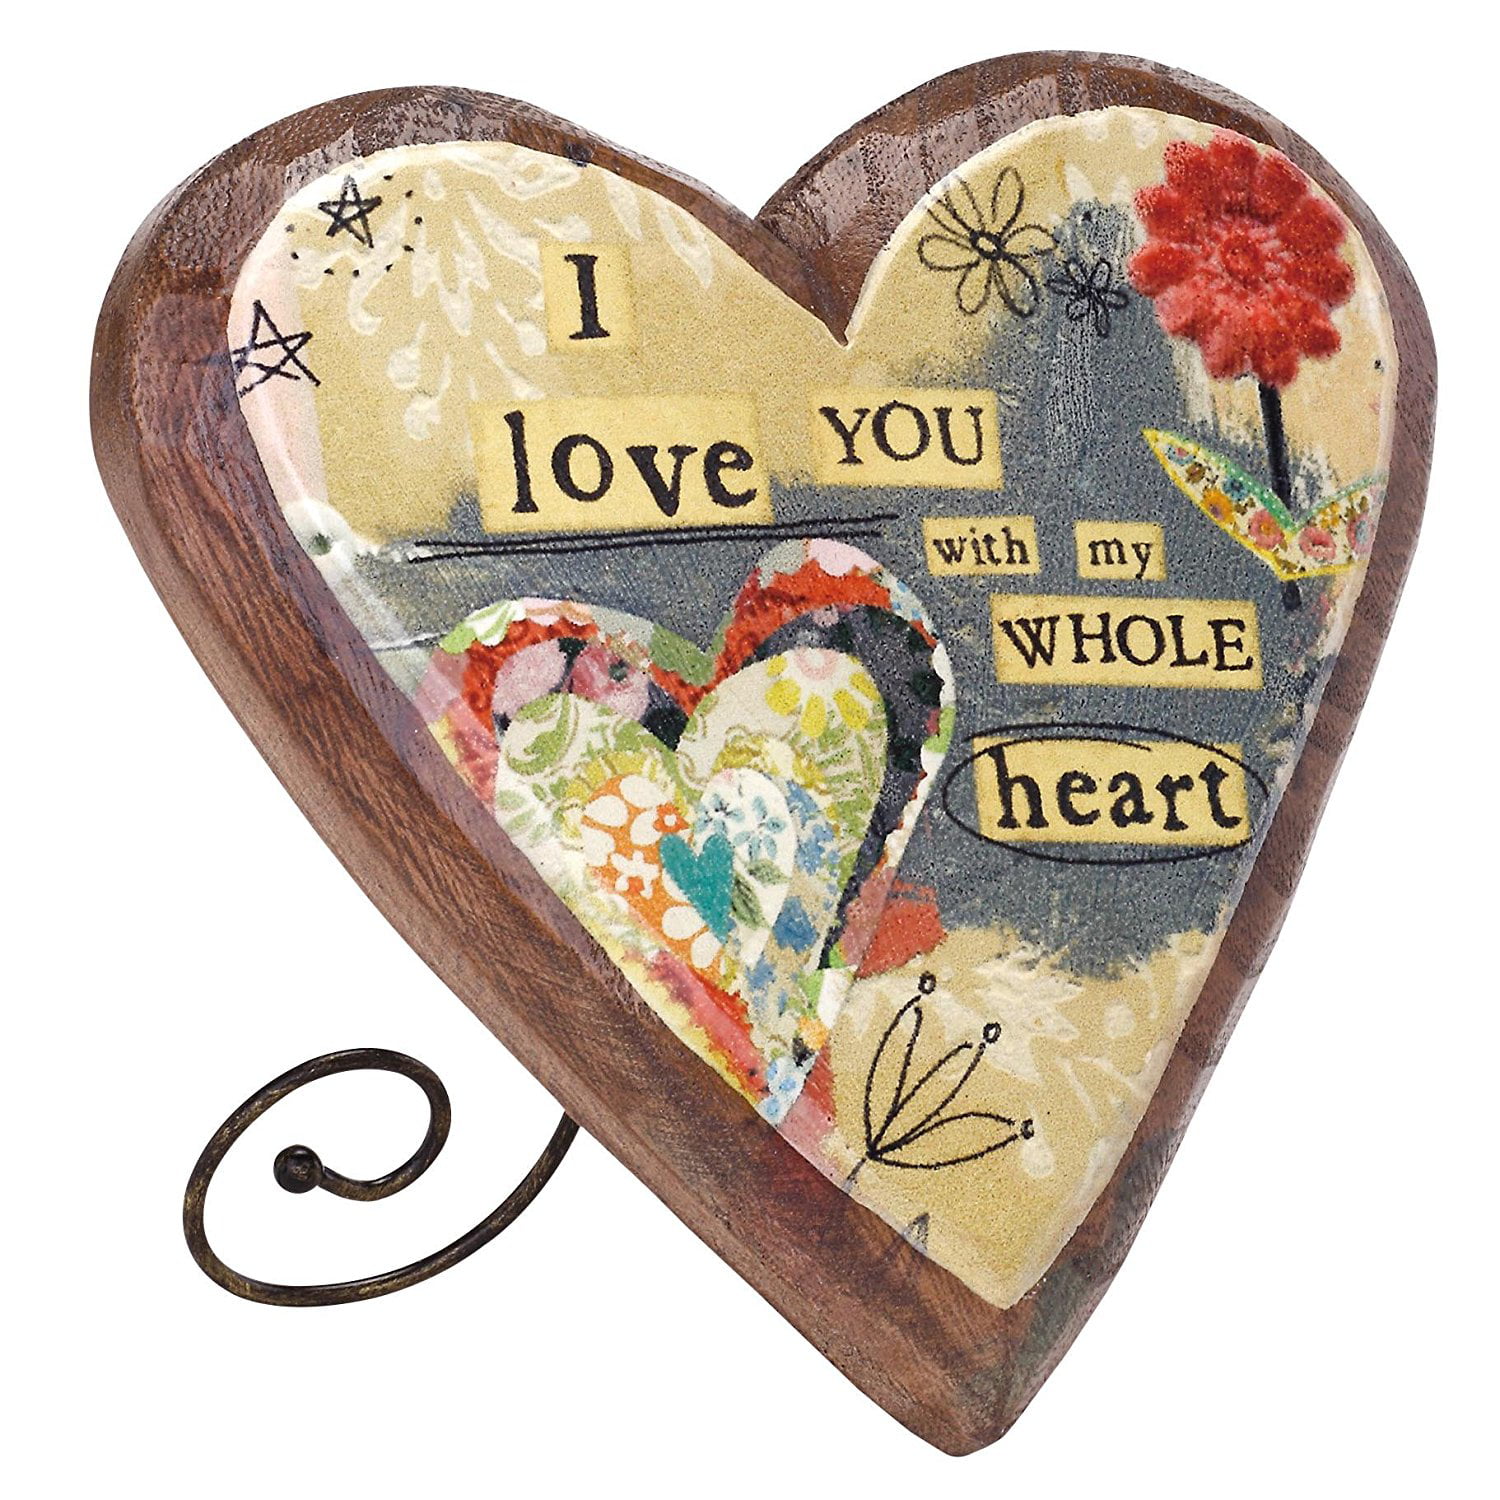 kelly-rae-roberts-love-wood-carved-heart-from-the-kelly-rae-roberts